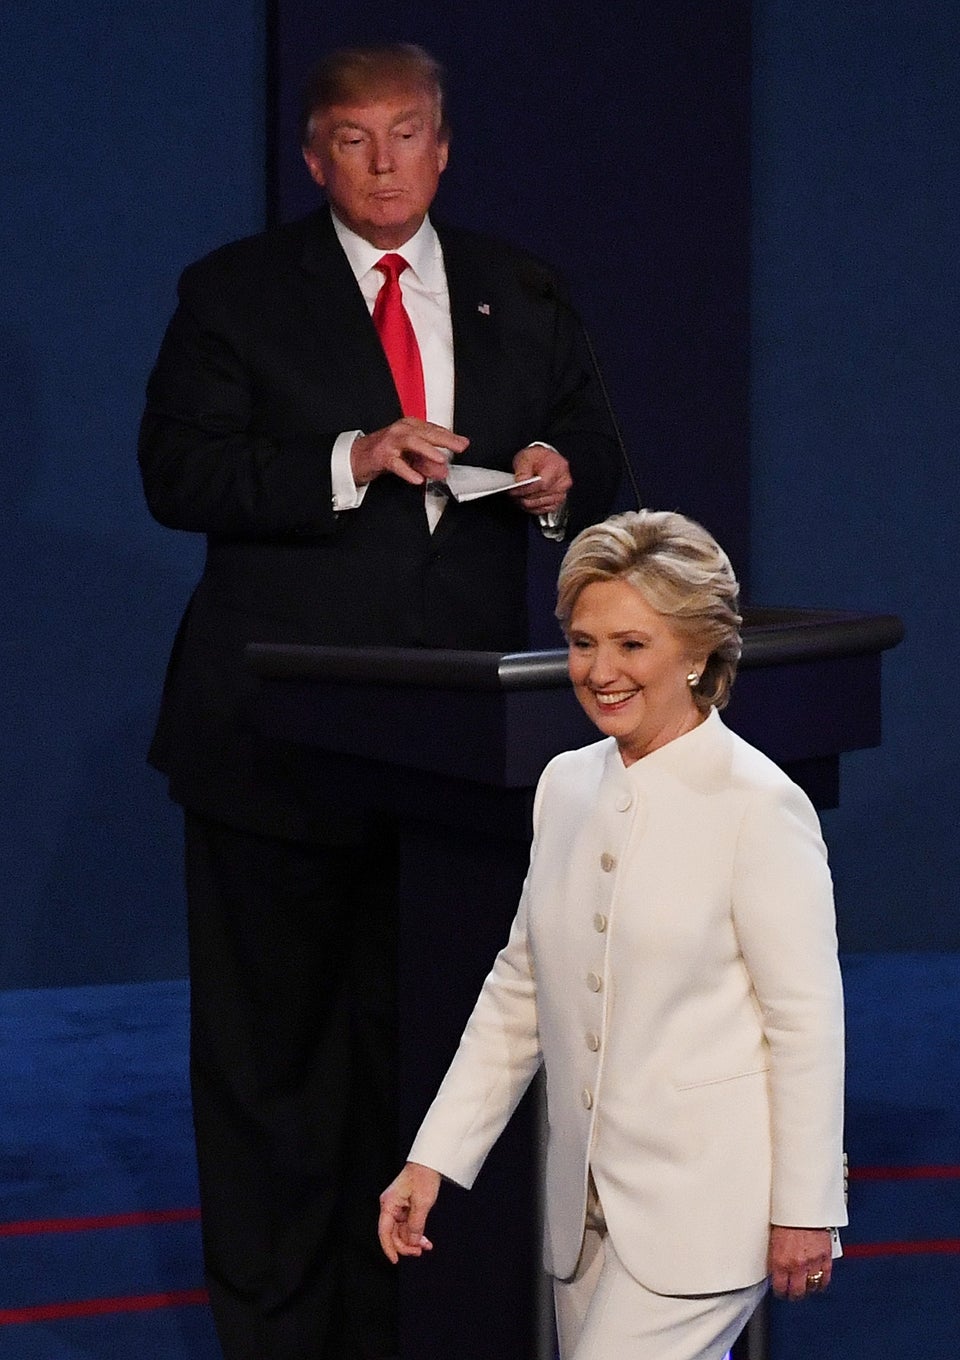 Bad Hombres, Nasty Women And Conspiracy Theories: The Final Debate Was The Most Substantive…And That’s Not Saying Much